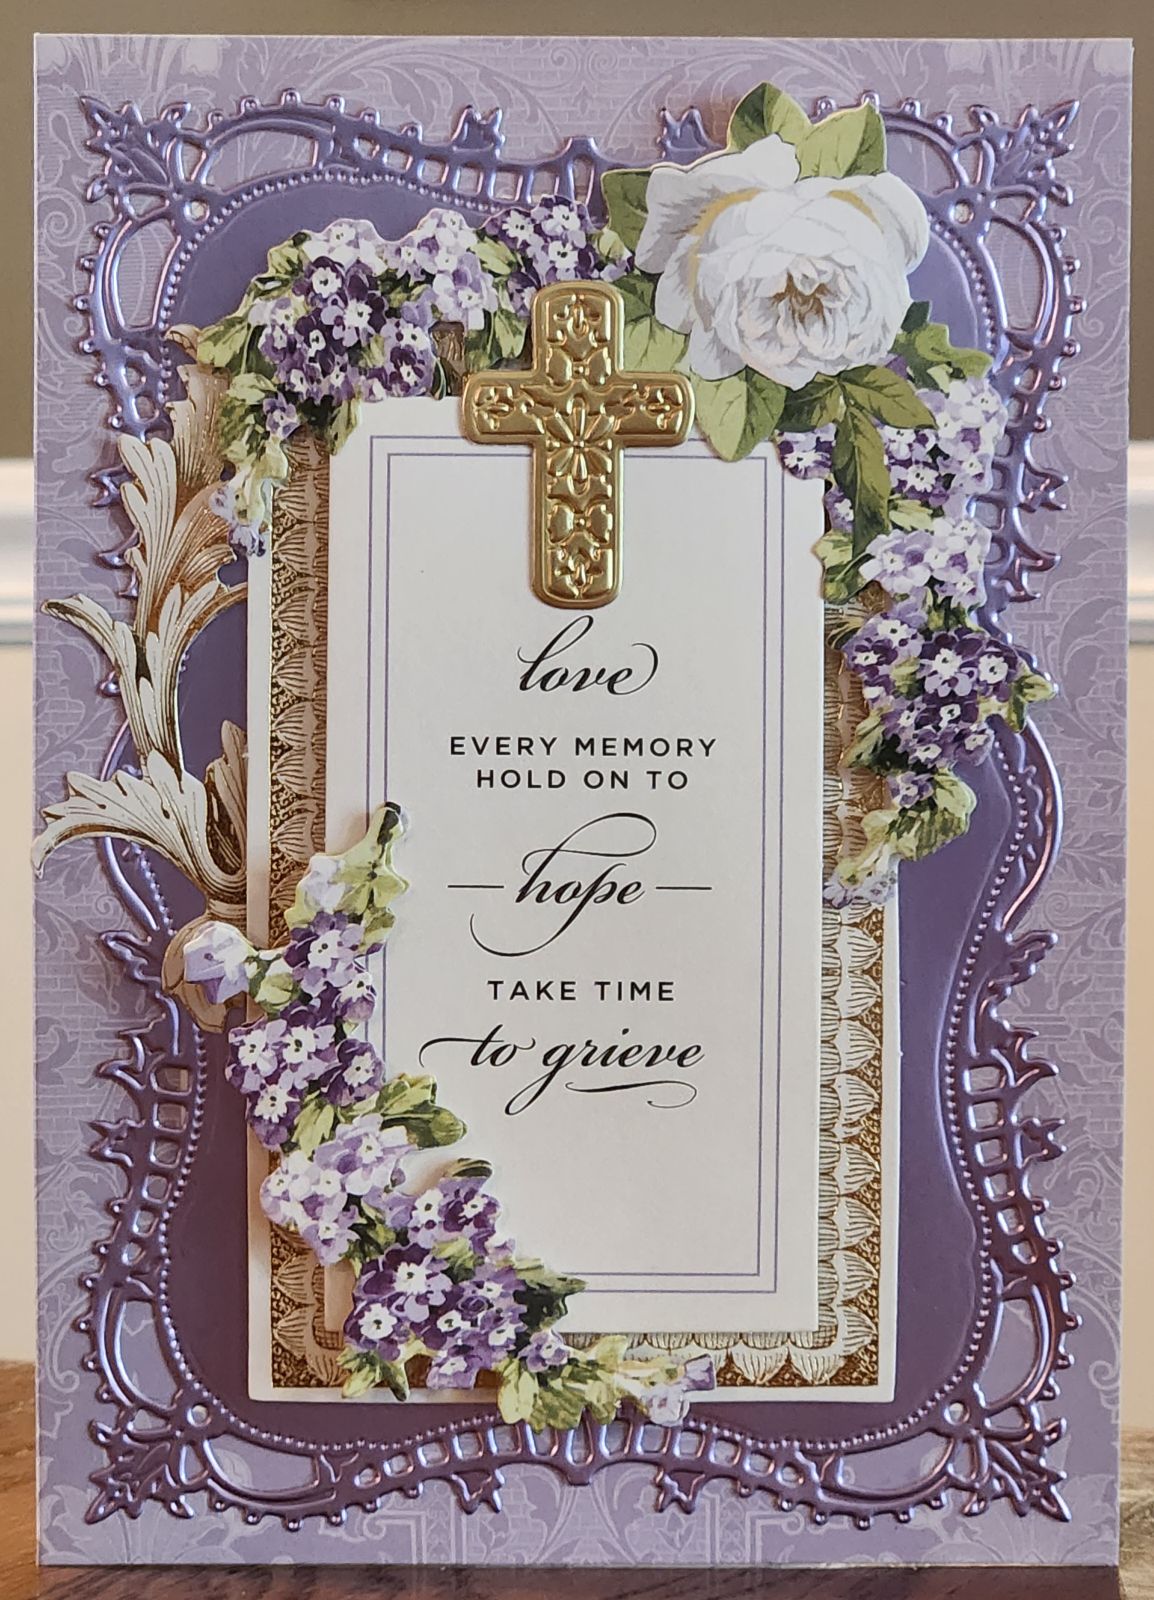 A purple card with a cross and flowers.